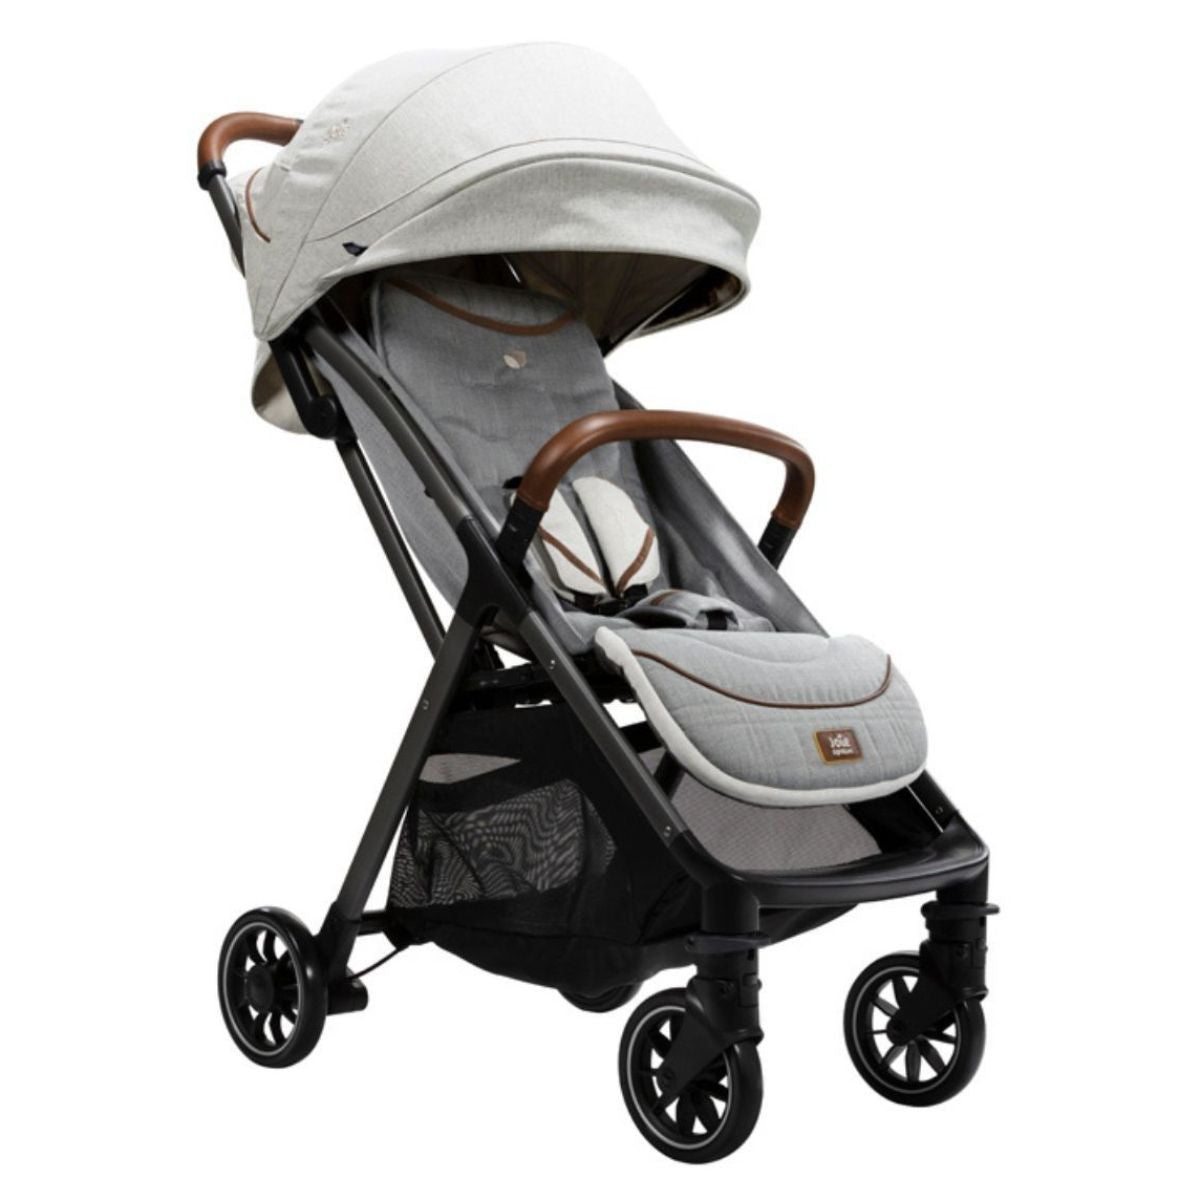 Joie Parcel Signature Stroller (come with adapter, rain cover and travel bag)